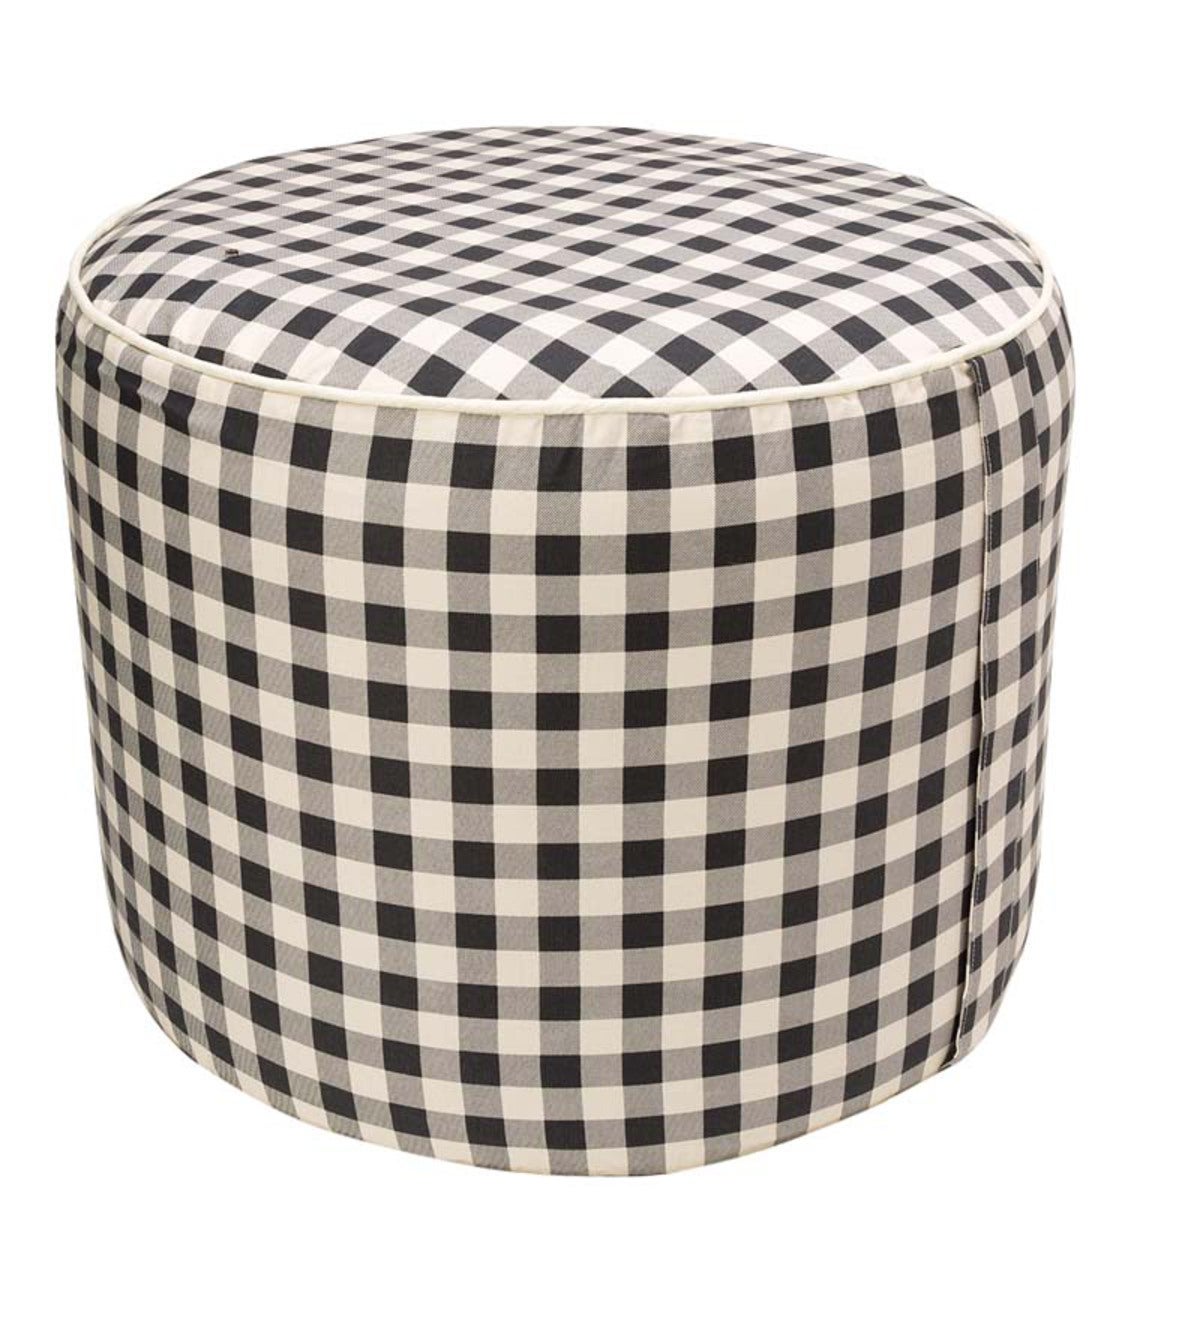 Large Round Inflatable Indoor Ottoman Pouf - Black Check